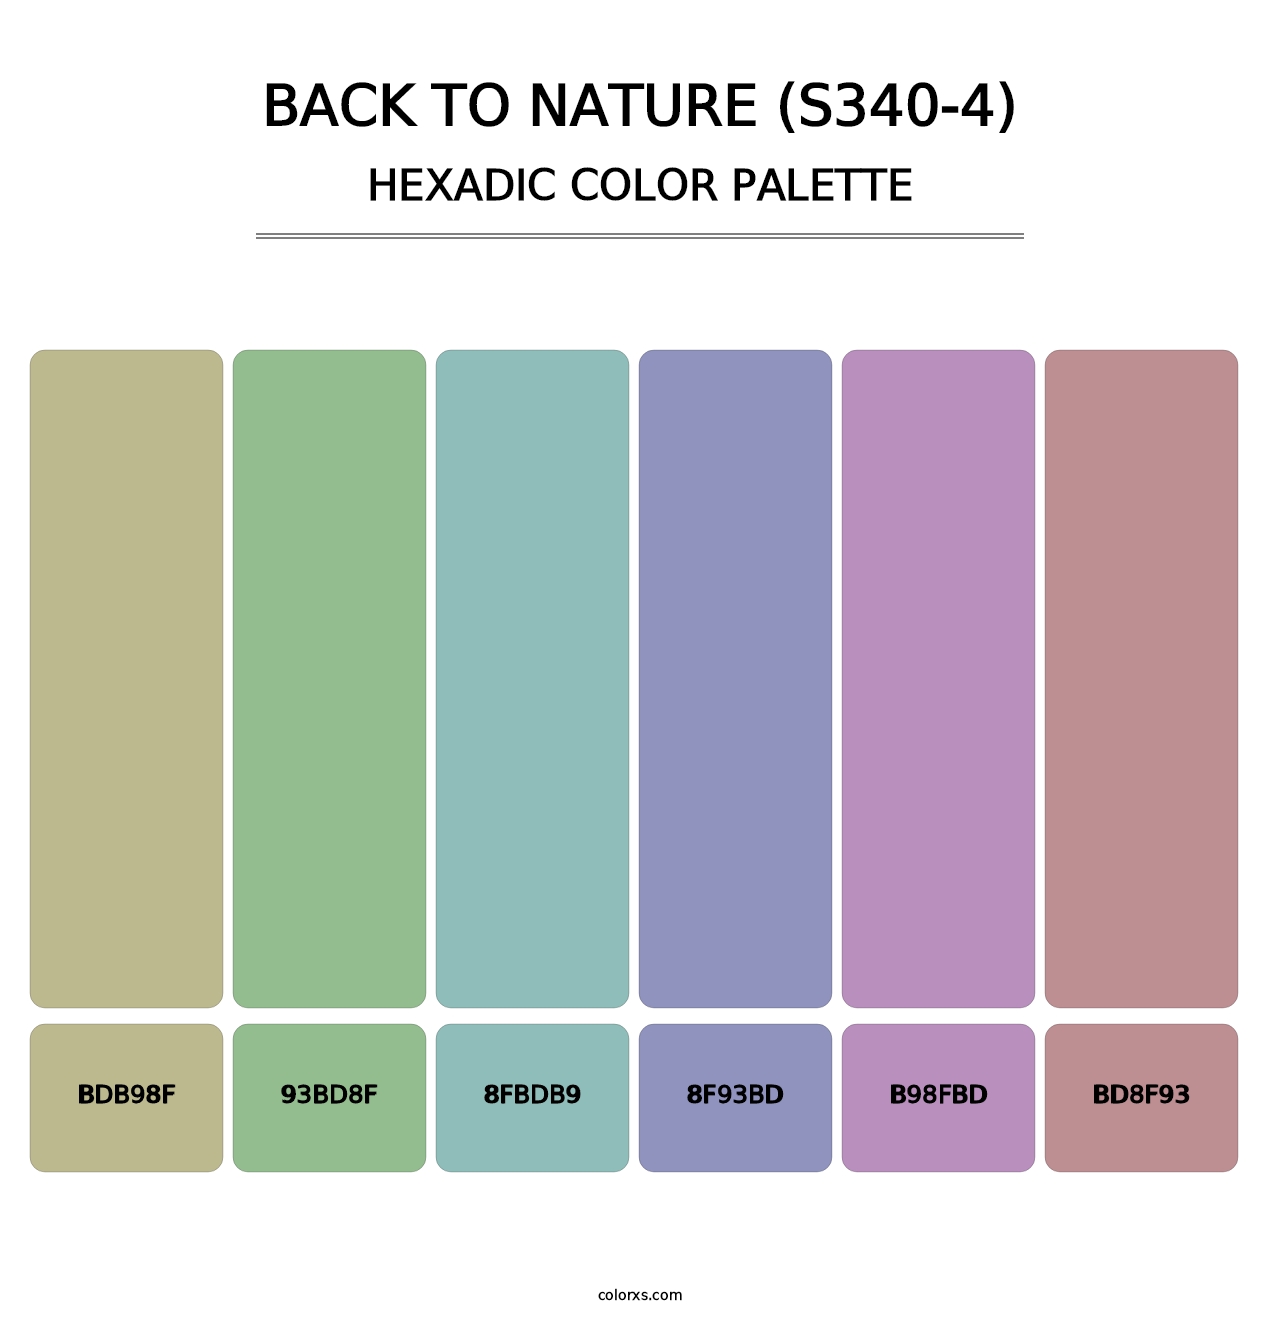 Back To Nature (S340-4) - Hexadic Color Palette